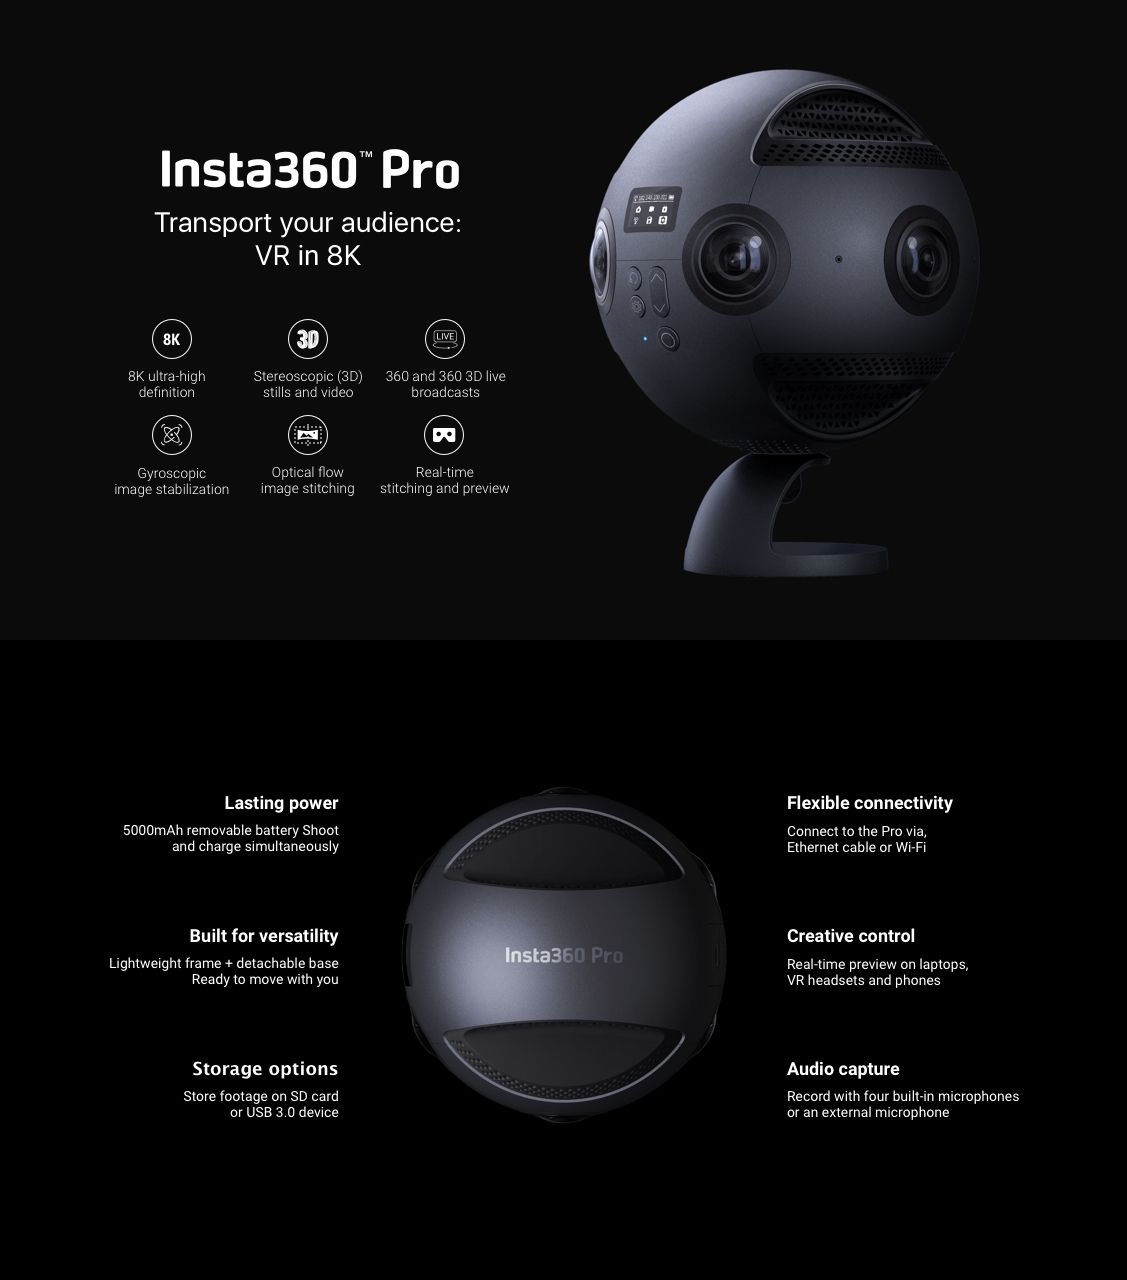 Insta360-Pro-8K-3D-360-VR-Video-Panoramic-Camera-4K-100fps-Slow-Motion-Anti-shake-with-Carrying-Case-1340613